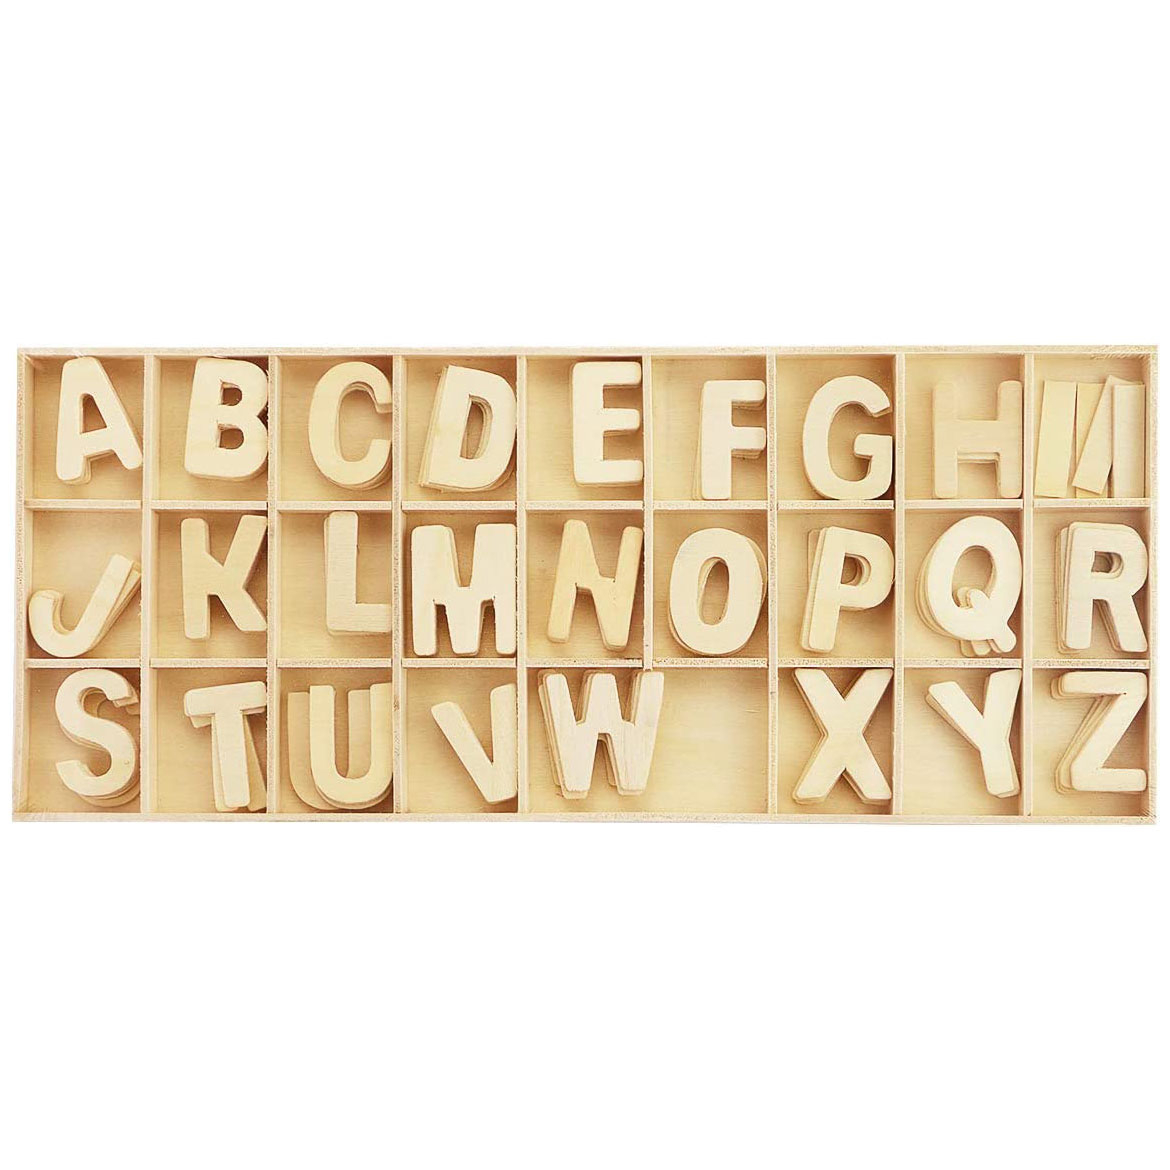 Wooden Craft Letters with Wood Storage Tray Set,Natural Blank Unfinished Wooden Alphabet Letters for Kids Learning Gift,Home Decoration